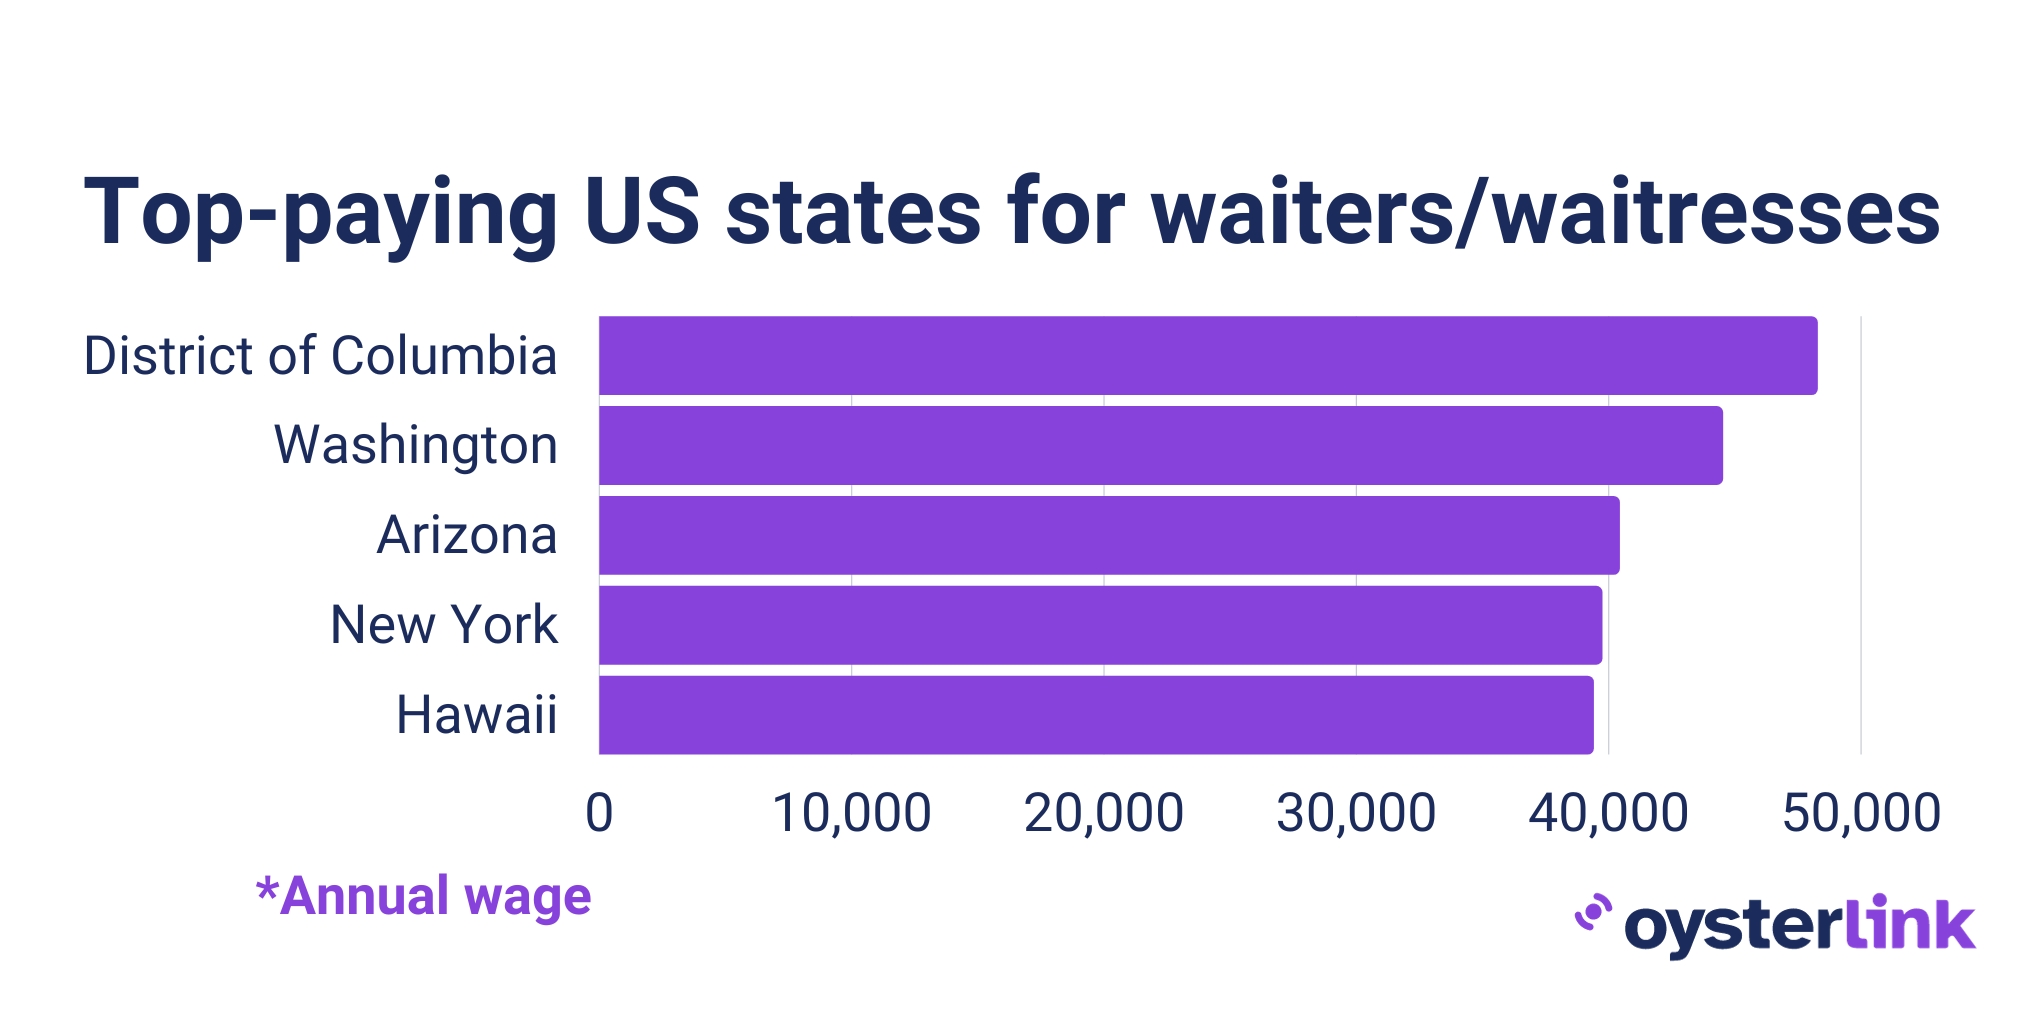 Top-paying U.S. states for waiters/waitresses